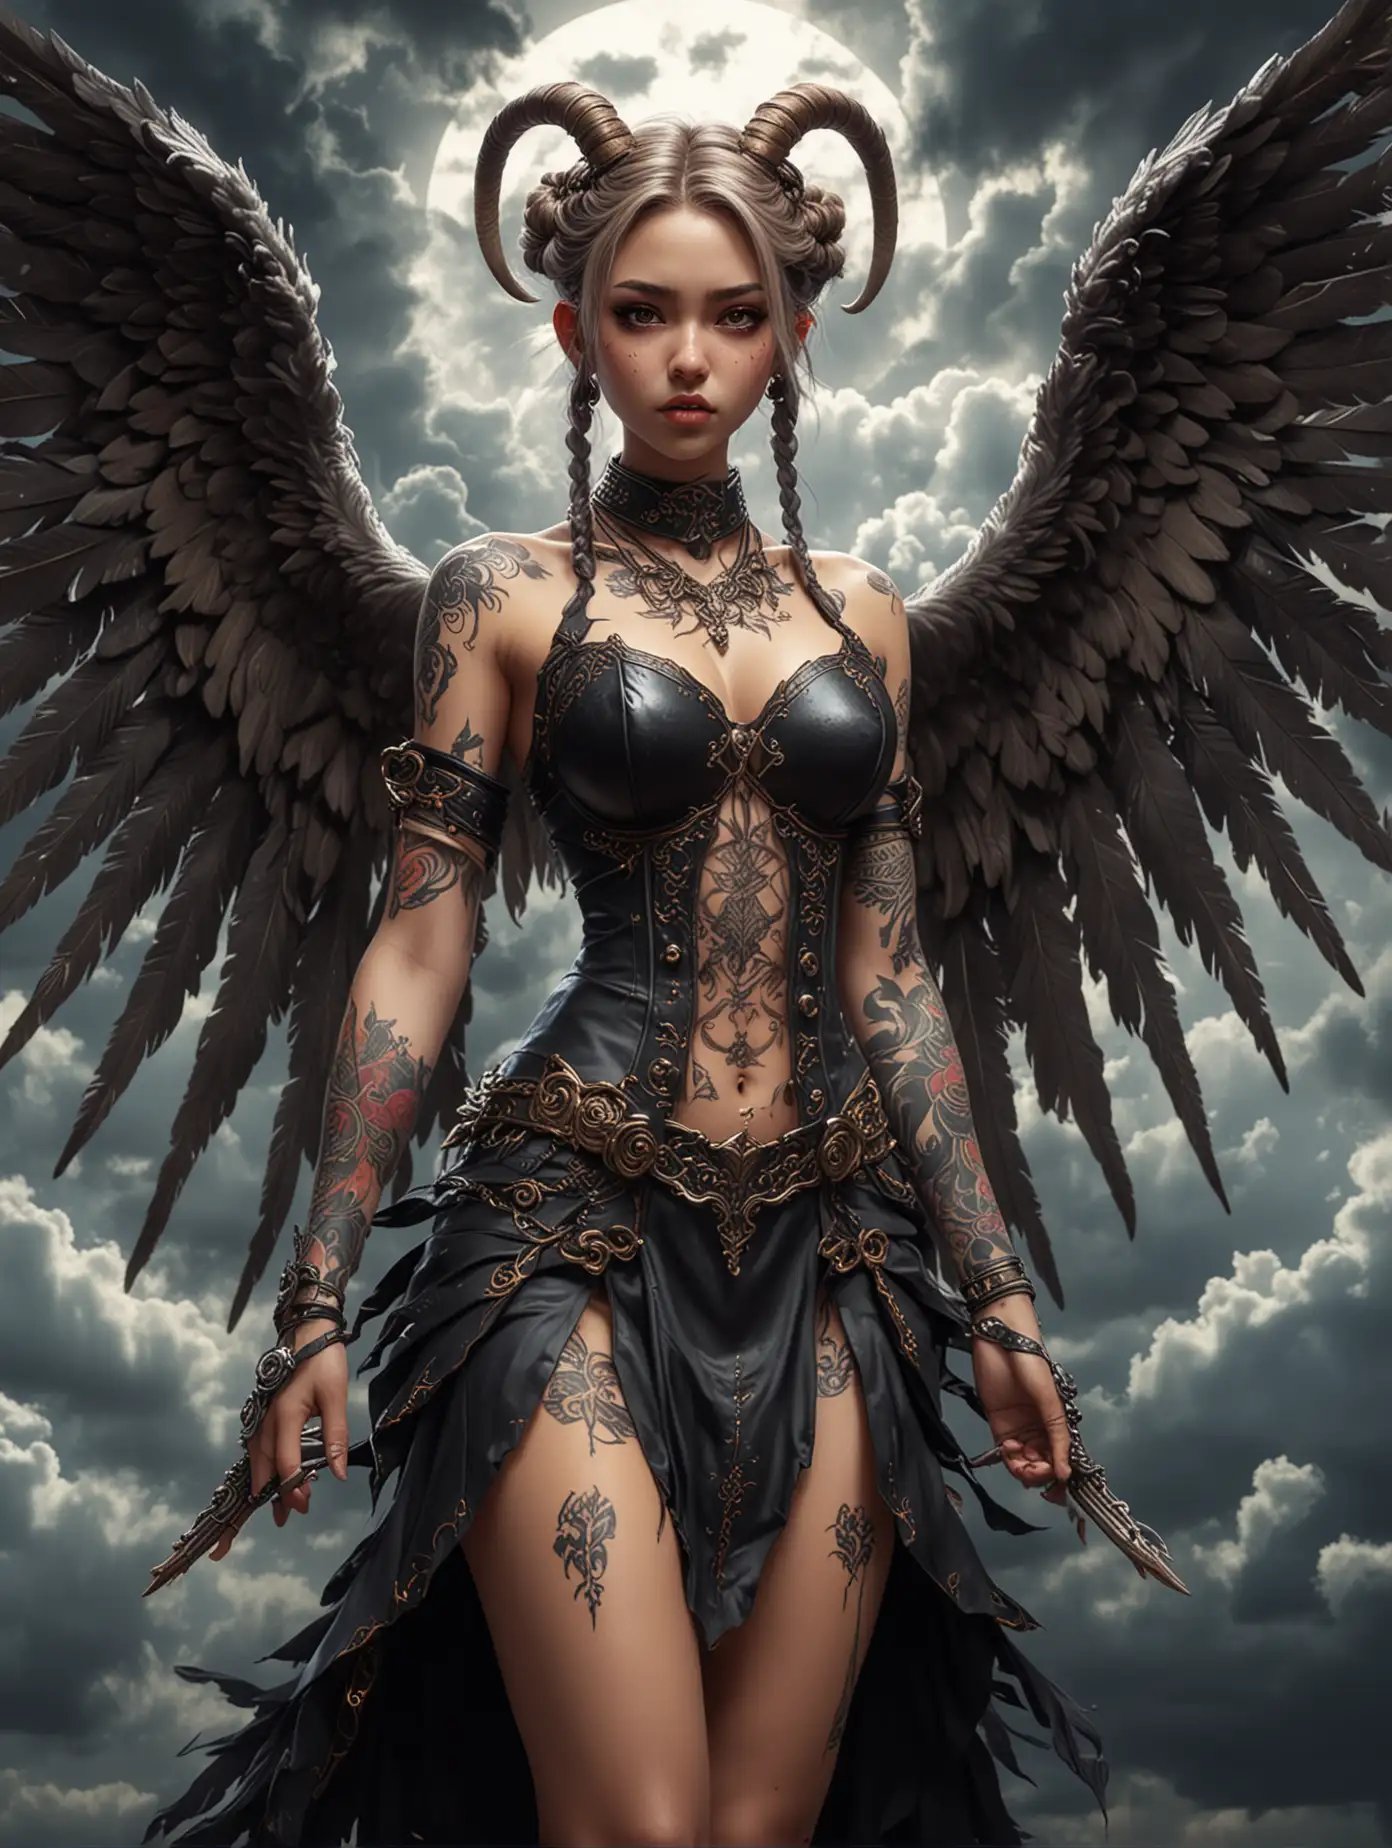 Beauty anime angel with braided hair and goat's horn, wears punk dress with large insane wings, adorned her skin with tattooes, dynamic seductive pose, dark clouds with ray tracing background, sinister, moody, colorful organic shape, rampant in creativity, ornate in details, masterpiece art